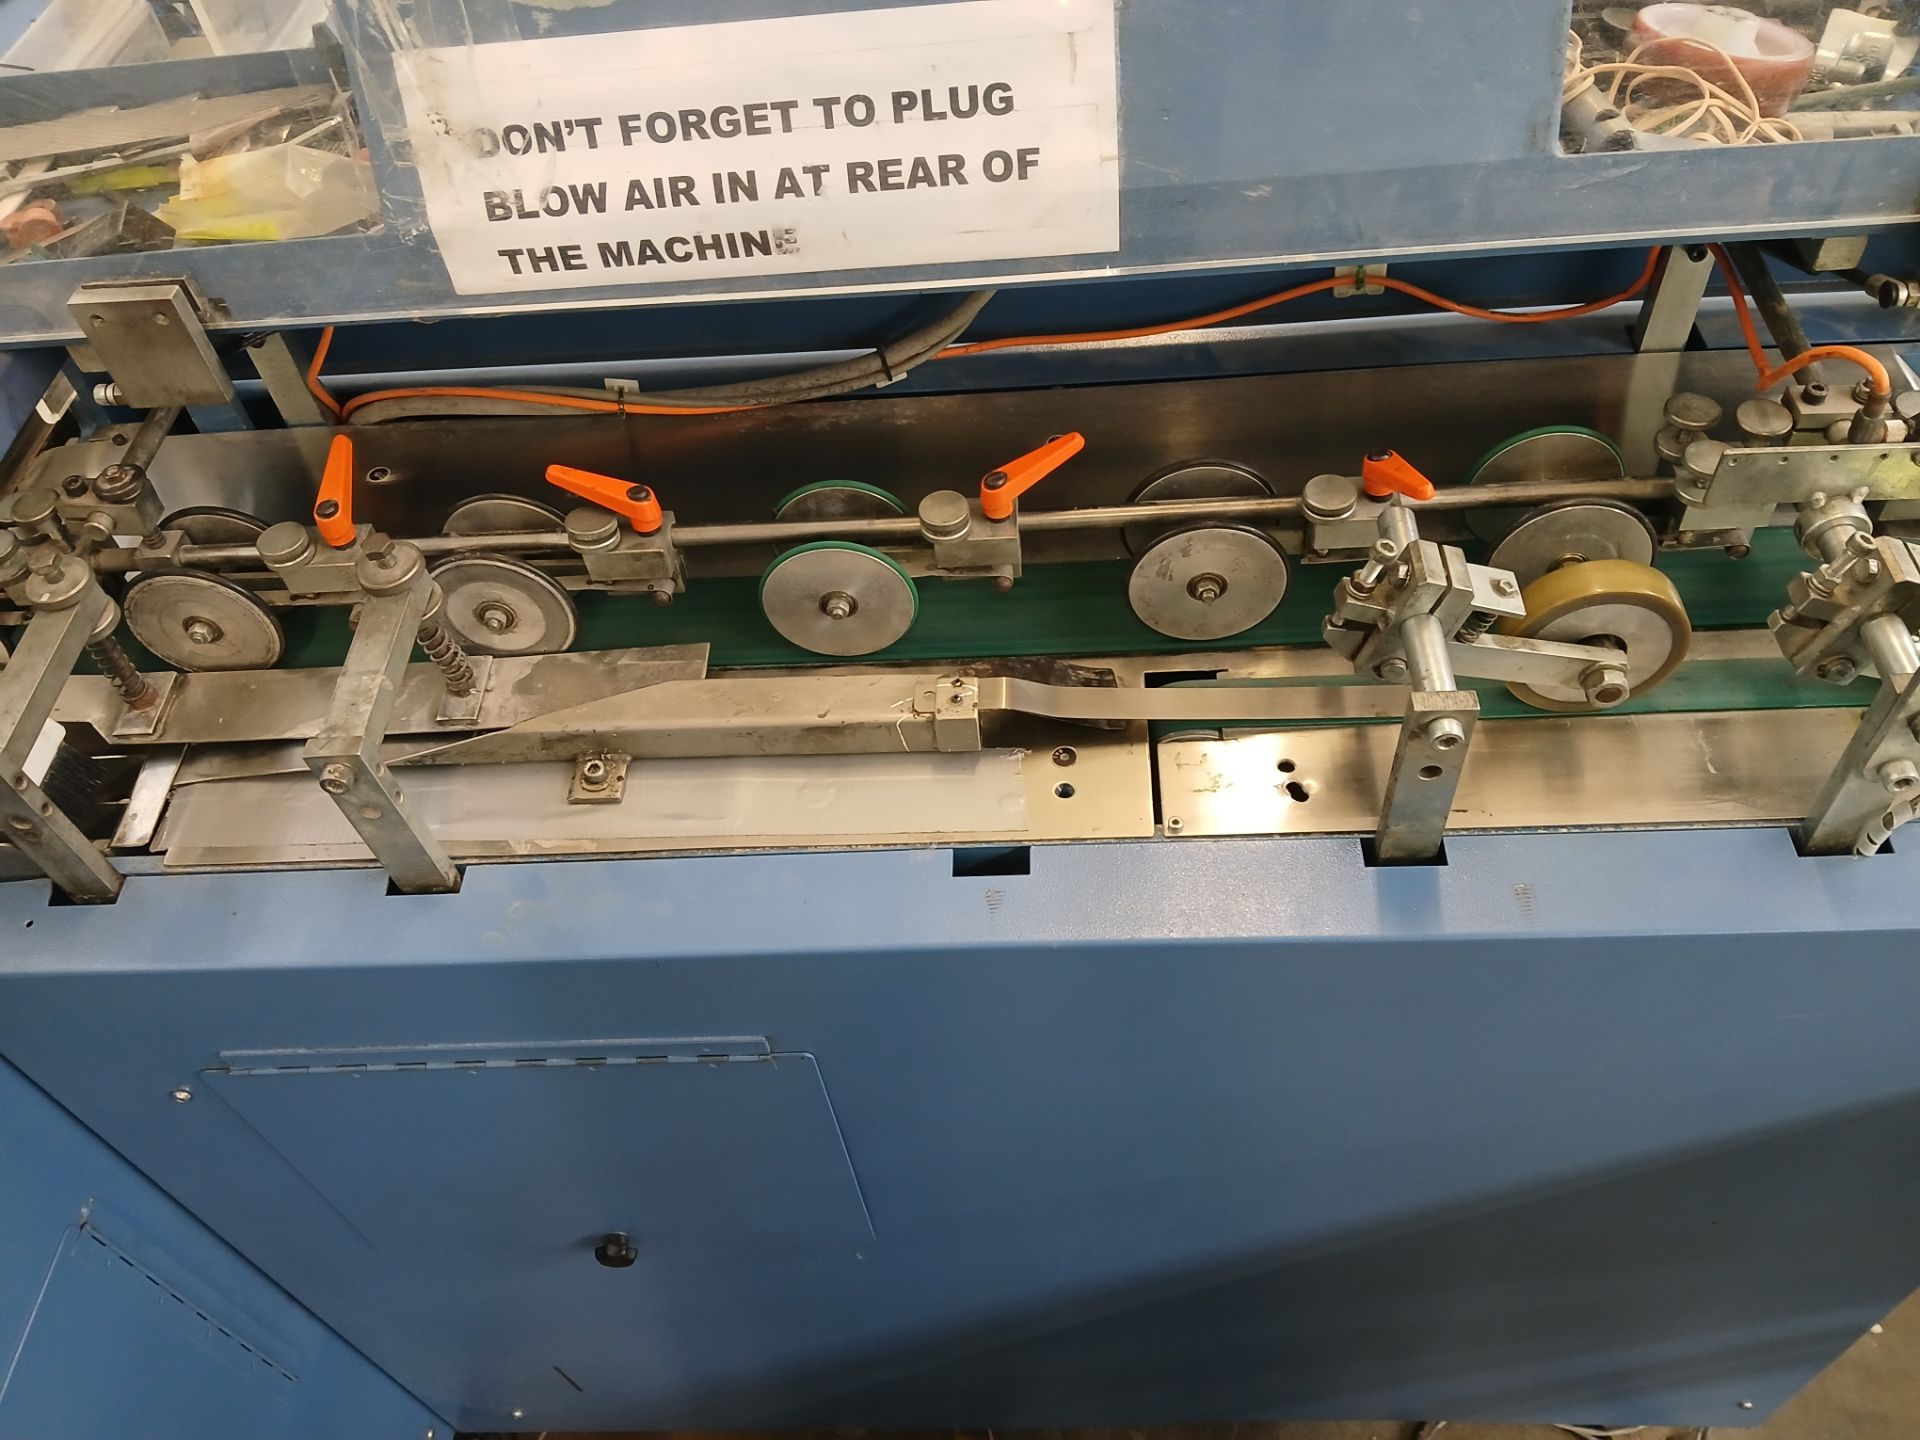 Buhrs/Promail BB300 6 station insertion line, Year believed to be 2001, with V710 feed unit and - Image 10 of 16